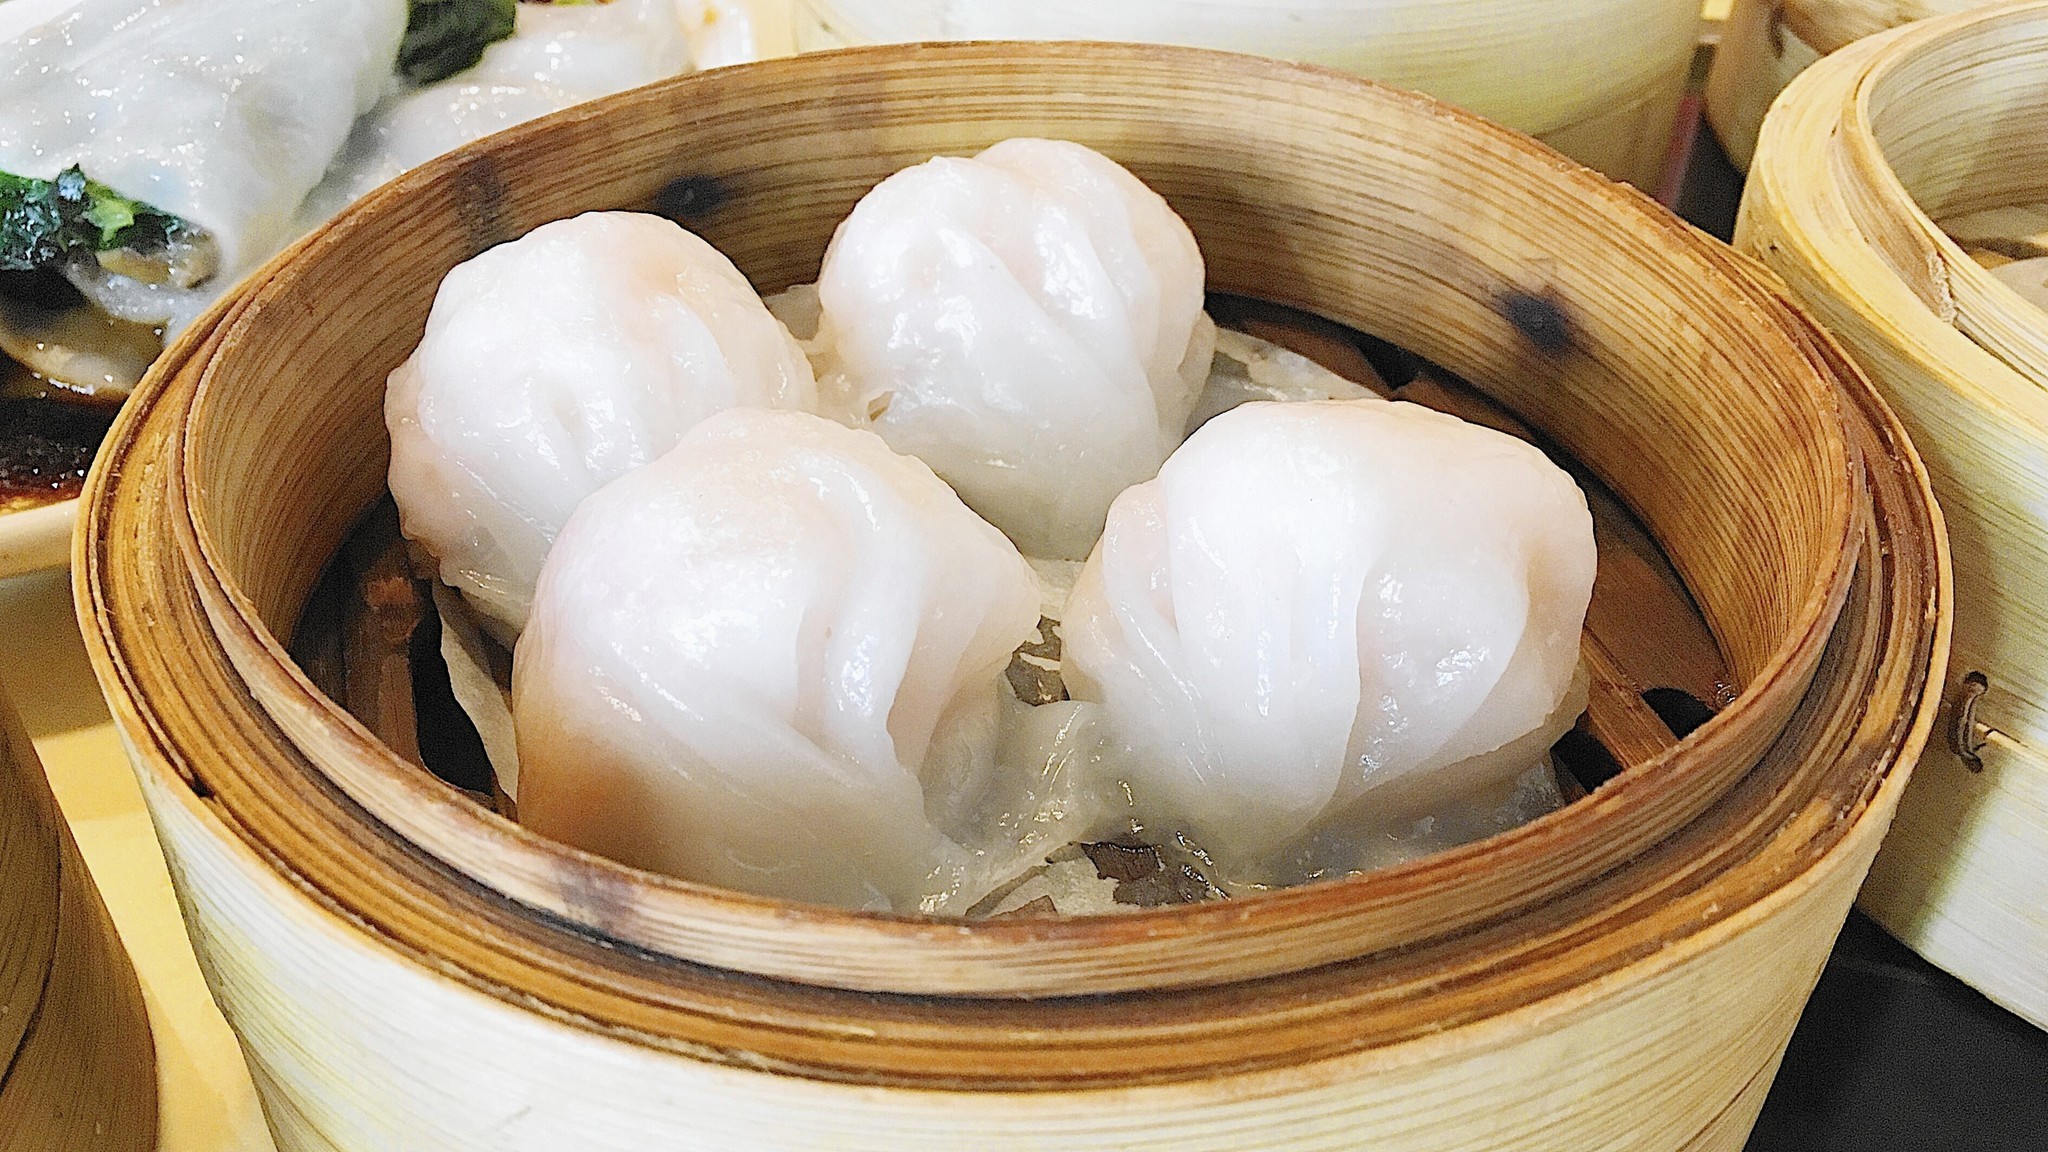 Dim sum guide: What to order, and what order to eat it - Chicago Tribune